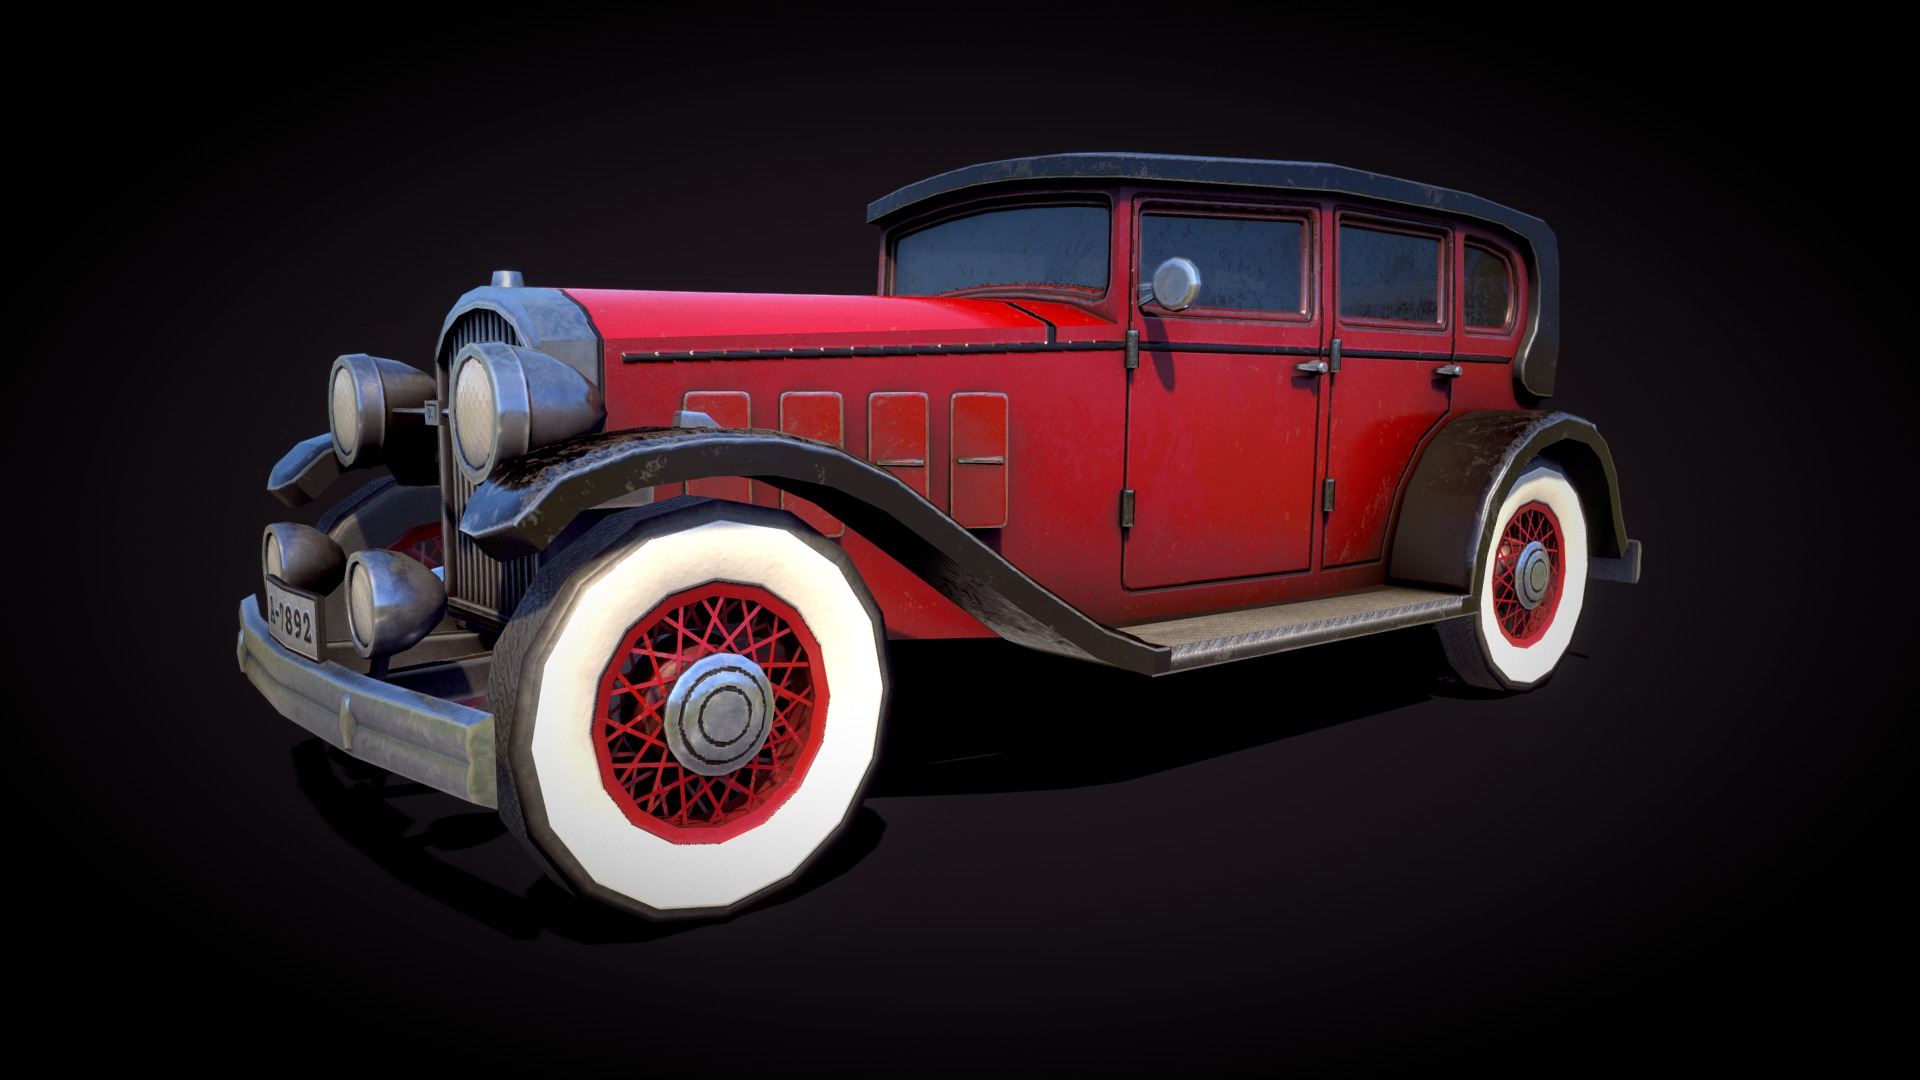 3D model Old Classic Car – LowPoly Challenge - This is a 3D model of the Old Classic Car - LowPoly Challenge. The 3D model is about a toy car on a white background.